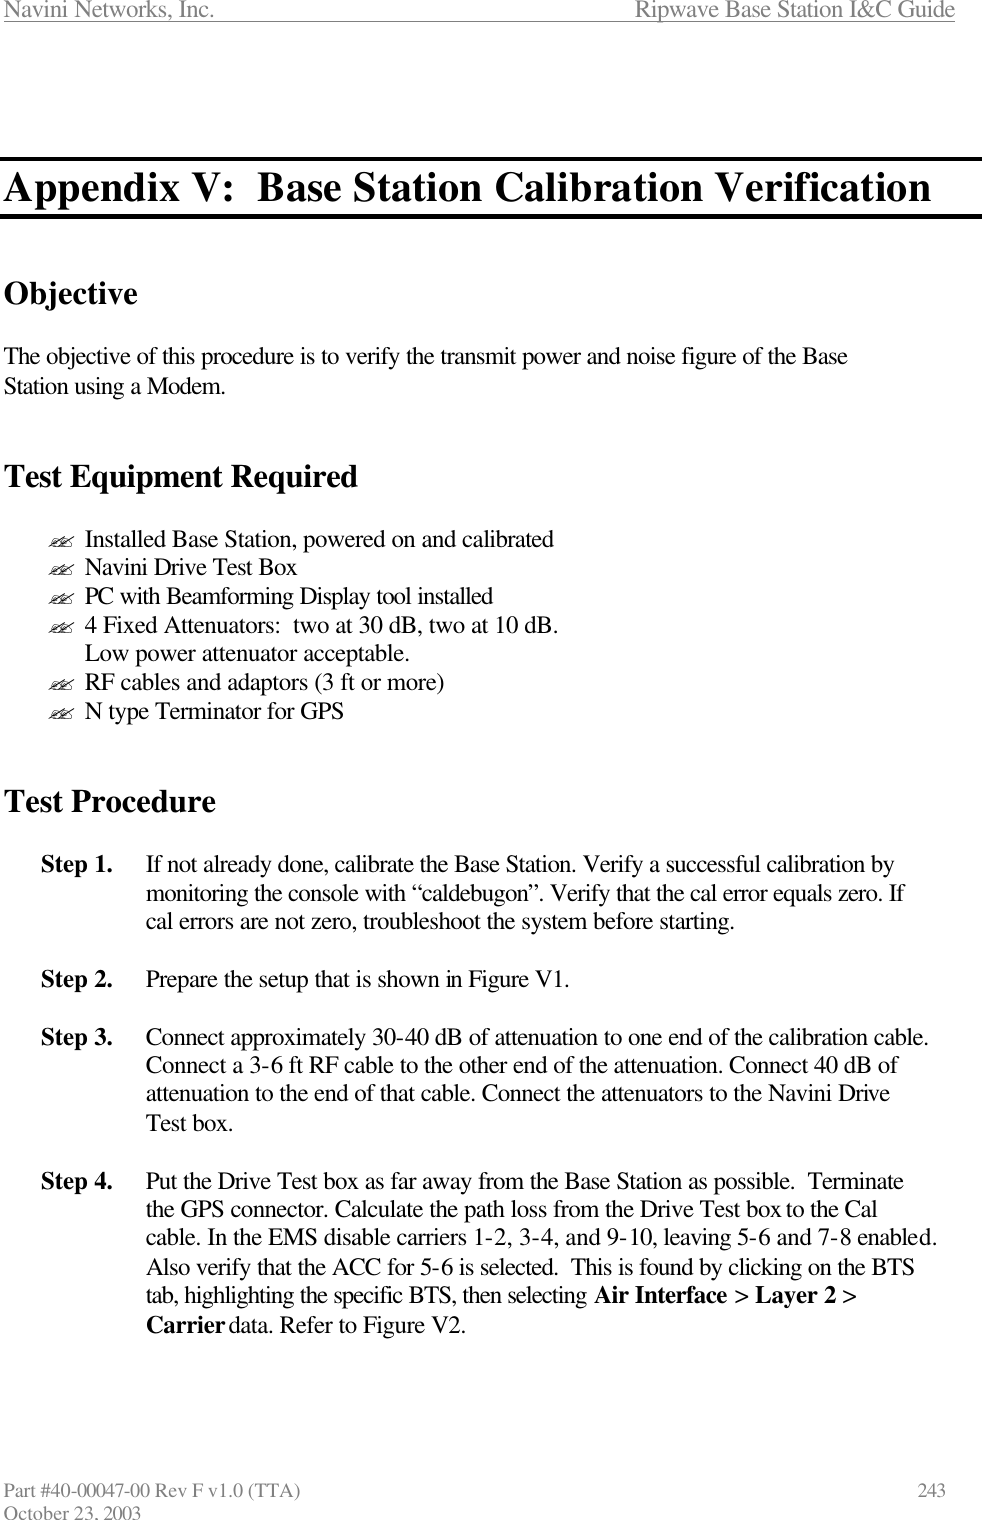 Navini Networks, Inc.                      Ripwave Base Station I&amp;C Guide Part #40-00047-00 Rev F v1.0 (TTA)            243 October 23, 2003    Appendix V:  Base Station Calibration Verification   Objective  The objective of this procedure is to verify the transmit power and noise figure of the Base Station using a Modem.   Test Equipment Required  ?? Installed Base Station, powered on and calibrated ?? Navini Drive Test Box ?? PC with Beamforming Display tool installed ?? 4 Fixed Attenuators:  two at 30 dB, two at 10 dB.  Low power attenuator acceptable. ?? RF cables and adaptors (3 ft or more) ?? N type Terminator for GPS    Test Procedure    Step 1. If not already done, calibrate the Base Station. Verify a successful calibration by monitoring the console with “caldebugon”. Verify that the cal error equals zero. If cal errors are not zero, troubleshoot the system before starting.   Step 2. Prepare the setup that is shown in Figure V1.  Step 3. Connect approximately 30-40 dB of attenuation to one end of the calibration cable. Connect a 3-6 ft RF cable to the other end of the attenuation. Connect 40 dB of attenuation to the end of that cable. Connect the attenuators to the Navini Drive Test box.  Step 4. Put the Drive Test box as far away from the Base Station as possible.  Terminate the GPS connector. Calculate the path loss from the Drive Test box to the Cal cable. In the EMS disable carriers 1-2, 3-4, and 9-10, leaving 5-6 and 7-8 enabled. Also verify that the ACC for 5-6 is selected.  This is found by clicking on the BTS tab, highlighting the specific BTS, then selecting Air Interface &gt; Layer 2 &gt; Carrier data. Refer to Figure V2.   